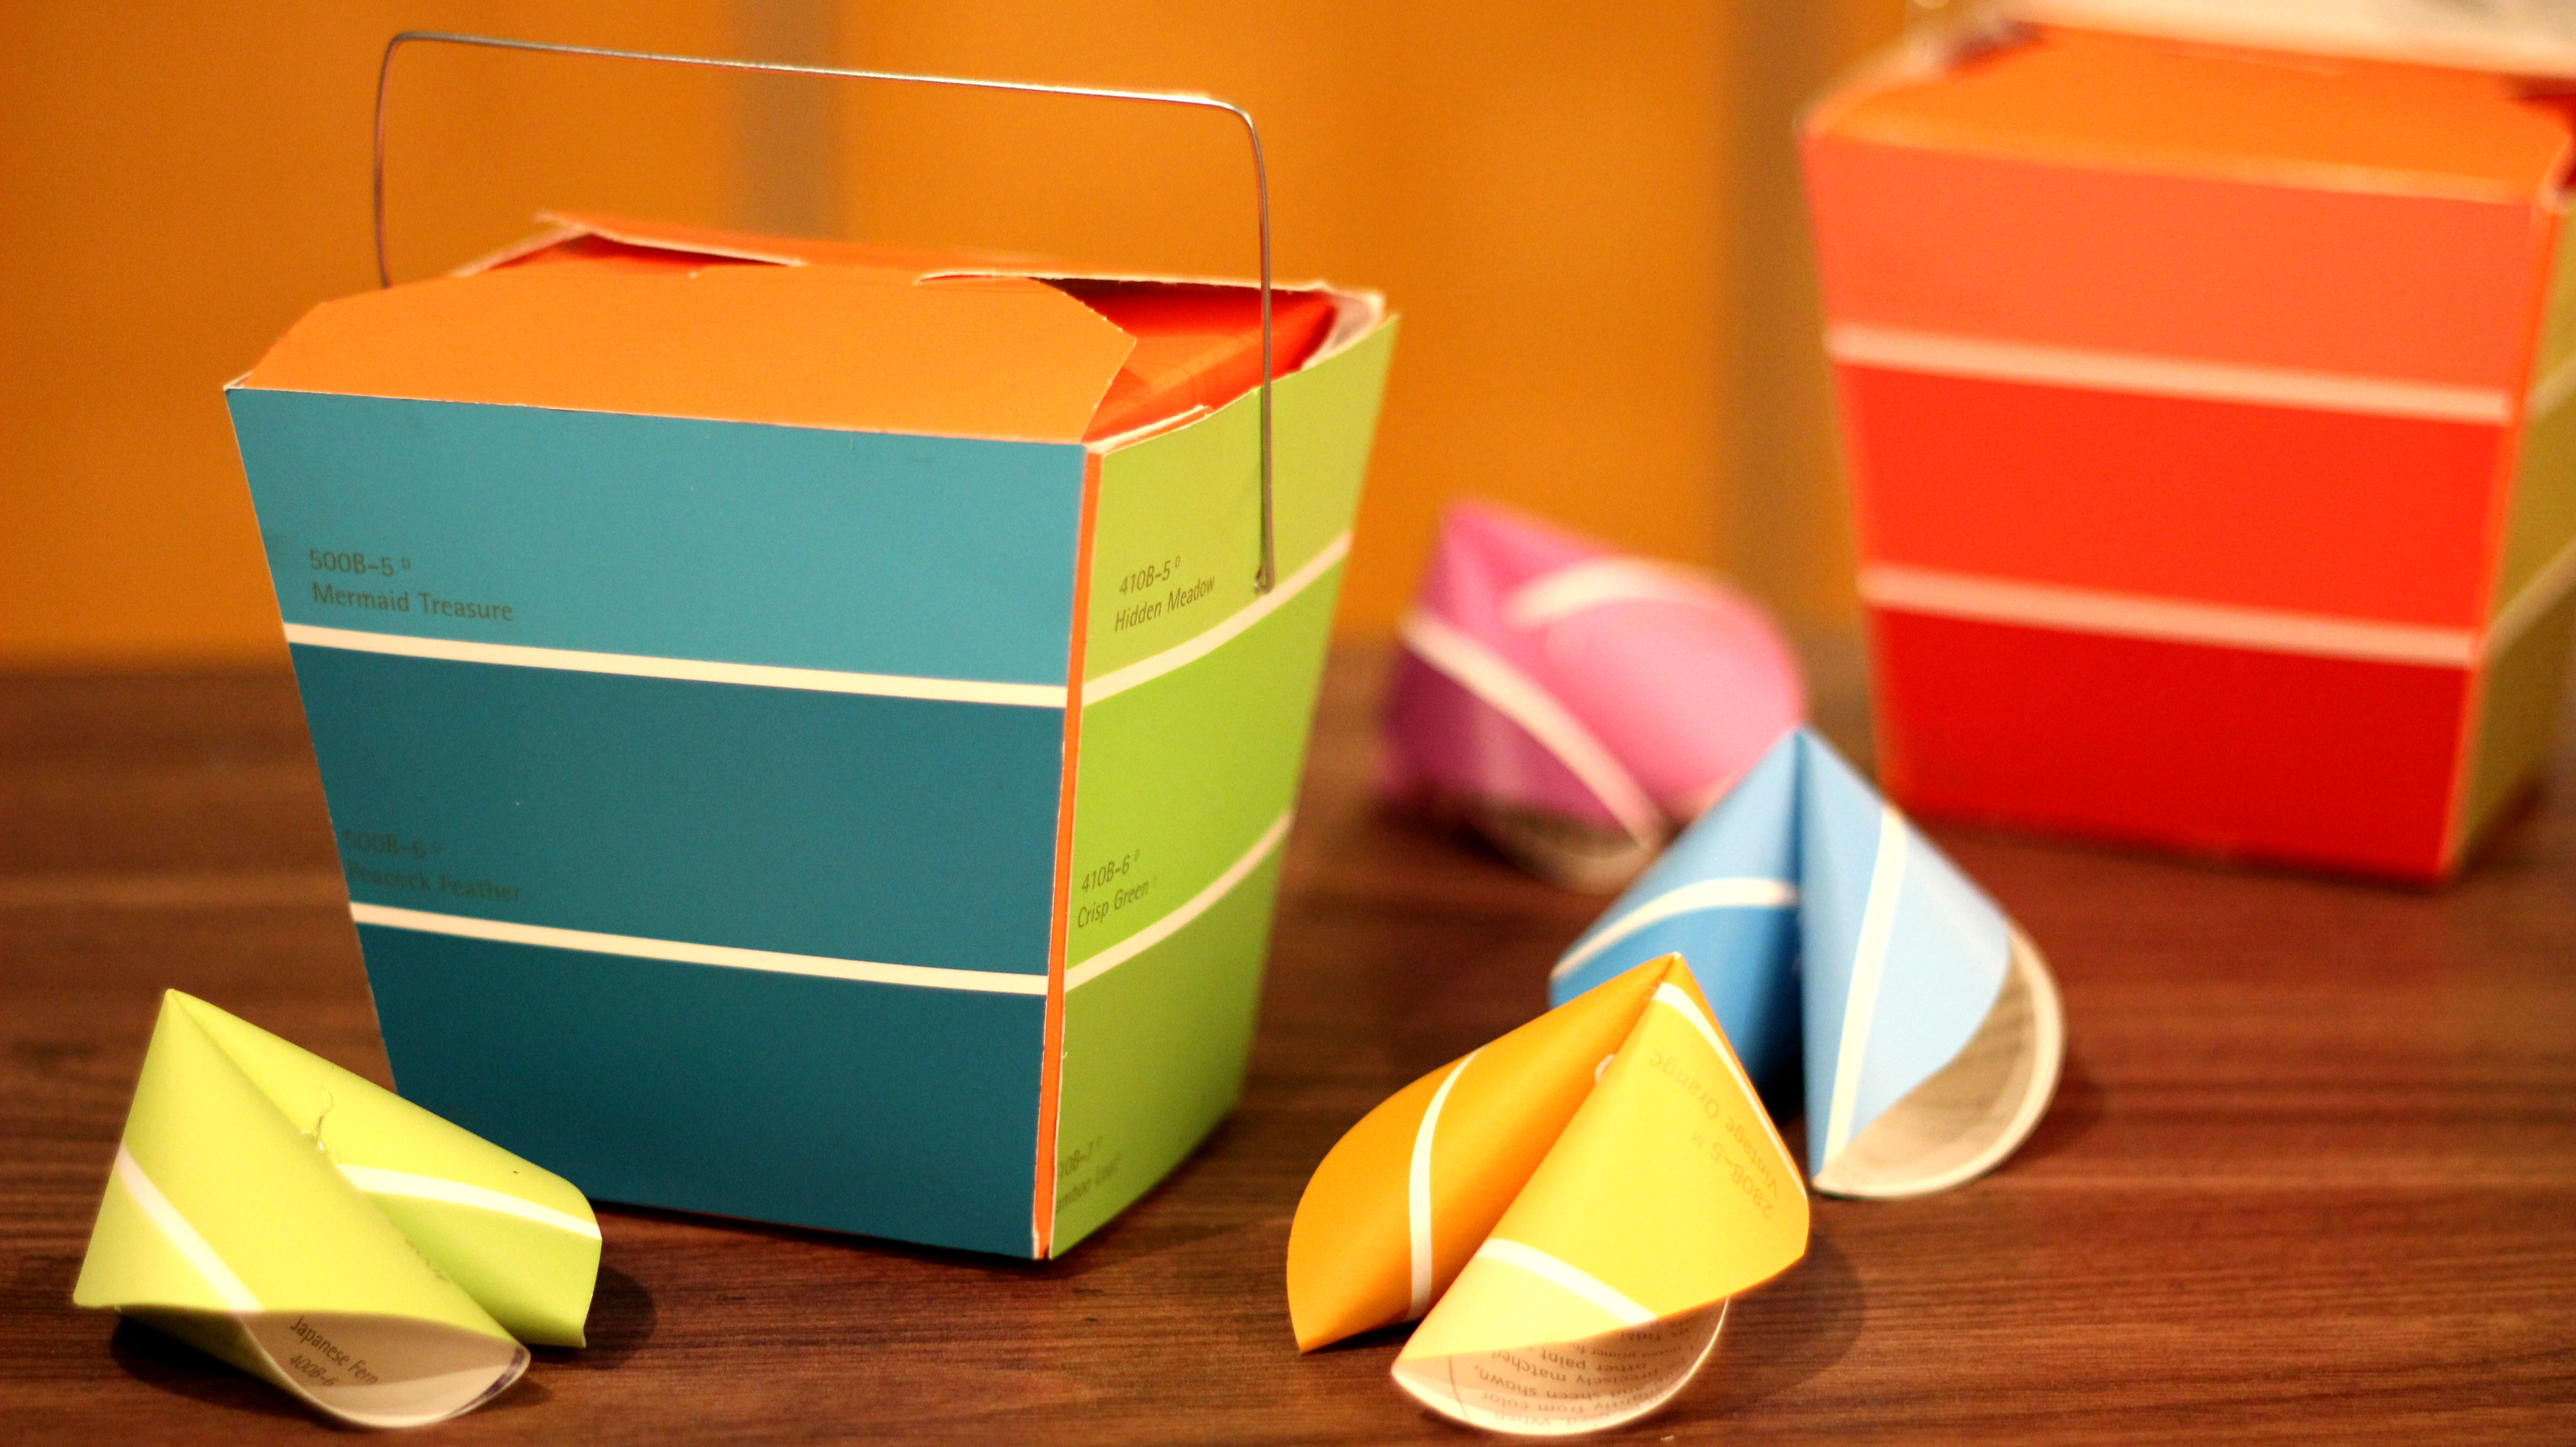 paint chip takeout box and fortune cookies